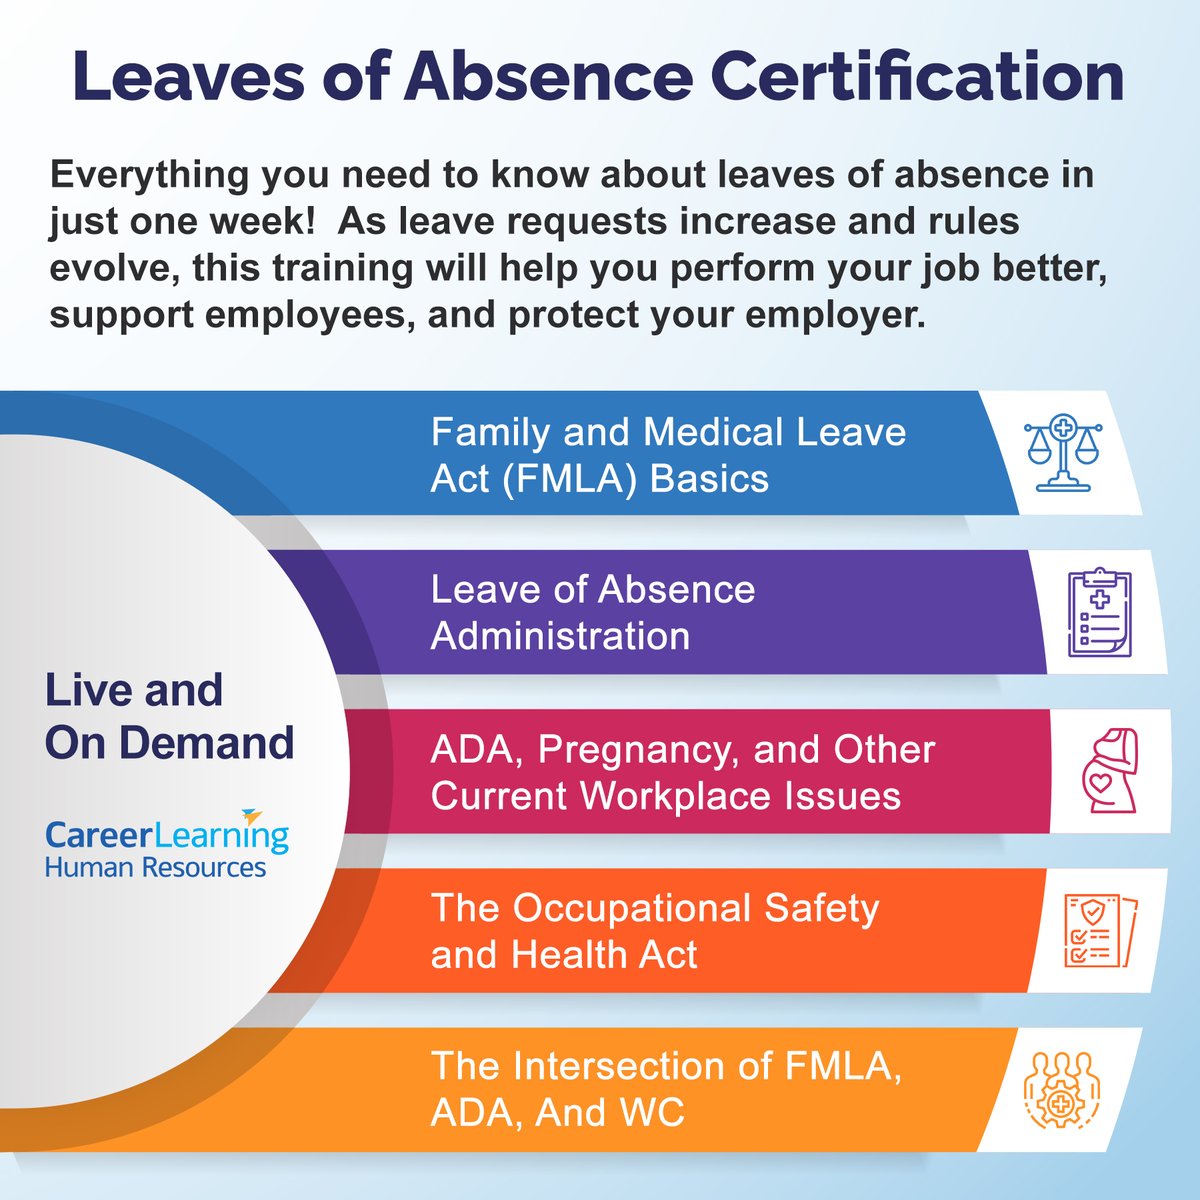 🌟 Leaves of Absence Certification Workshop 📜✨ May 20-24, 2024! Stay updated on rising leave requests & evolving rules. 🚀 Register now & earn your certification! 📚 bit.ly/LOACert24 
#HRTraining #LeavesOfAbsence #Certification #CareerLearning